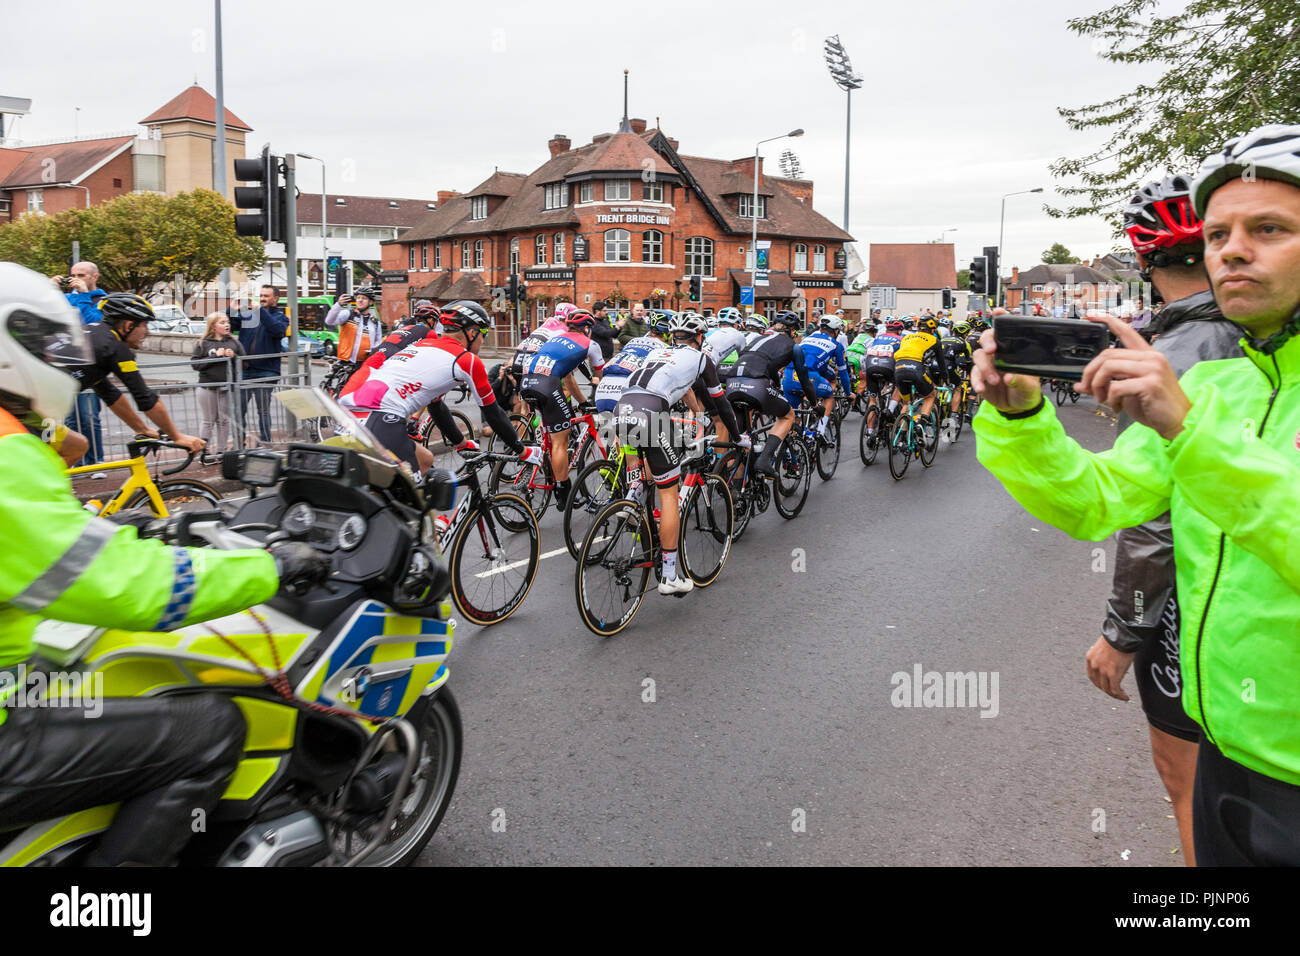 West Bridgford, Nottingham, UK. 8th September 2018. Spectators watch and photograph as the Tour of Britain cycle race passes over Trent Bridge in West Bridgford, Nottingham.  Credit: Martyn Williams/Alamy Live News Stock Photo